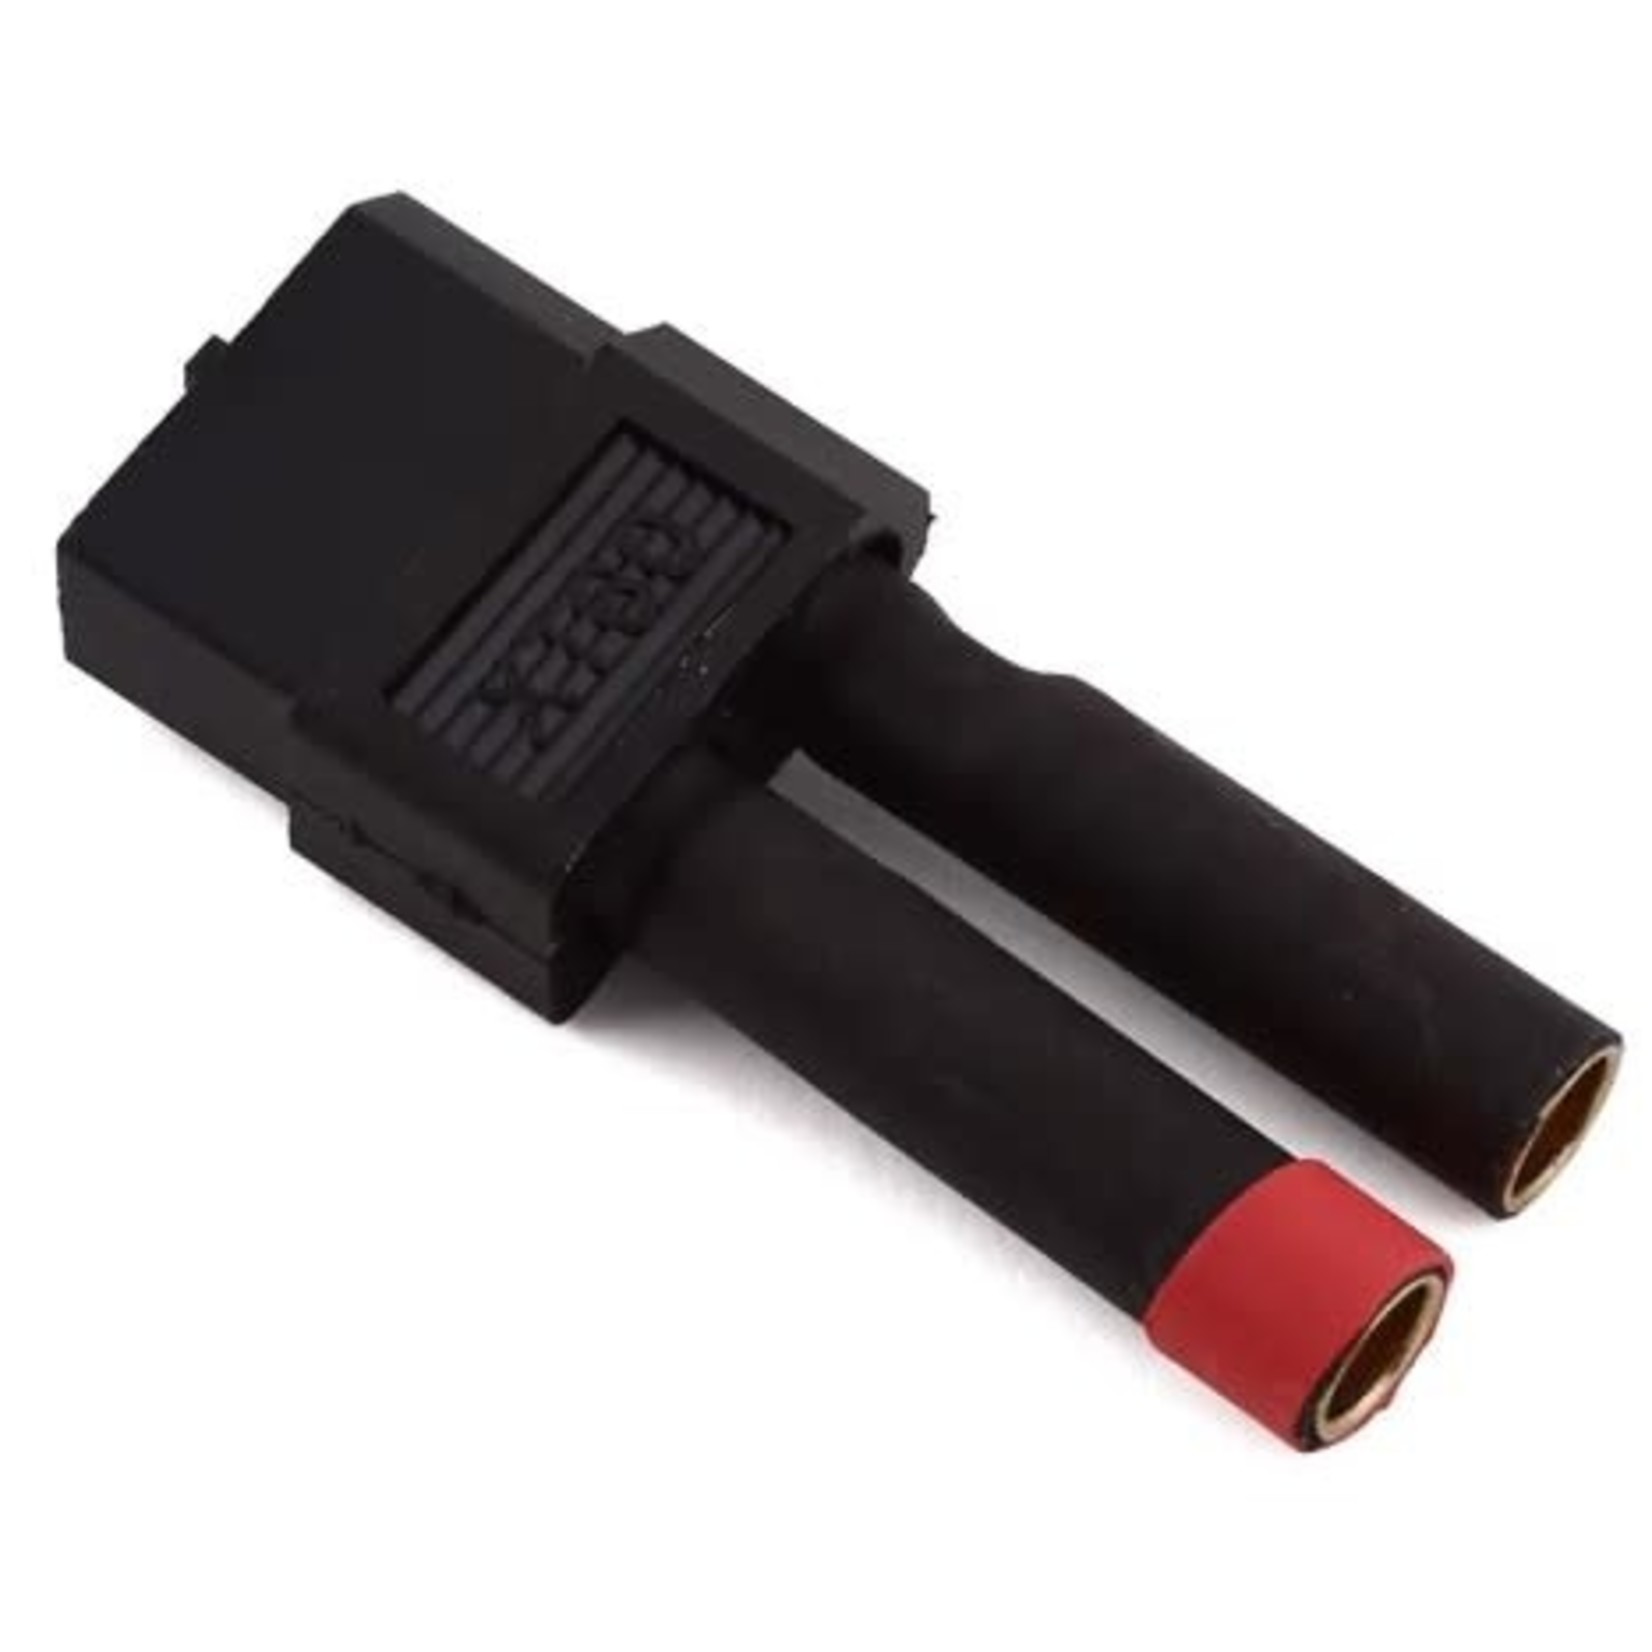 Charge Adapter Cable (4mm Bullet to XT60 Female Connector)